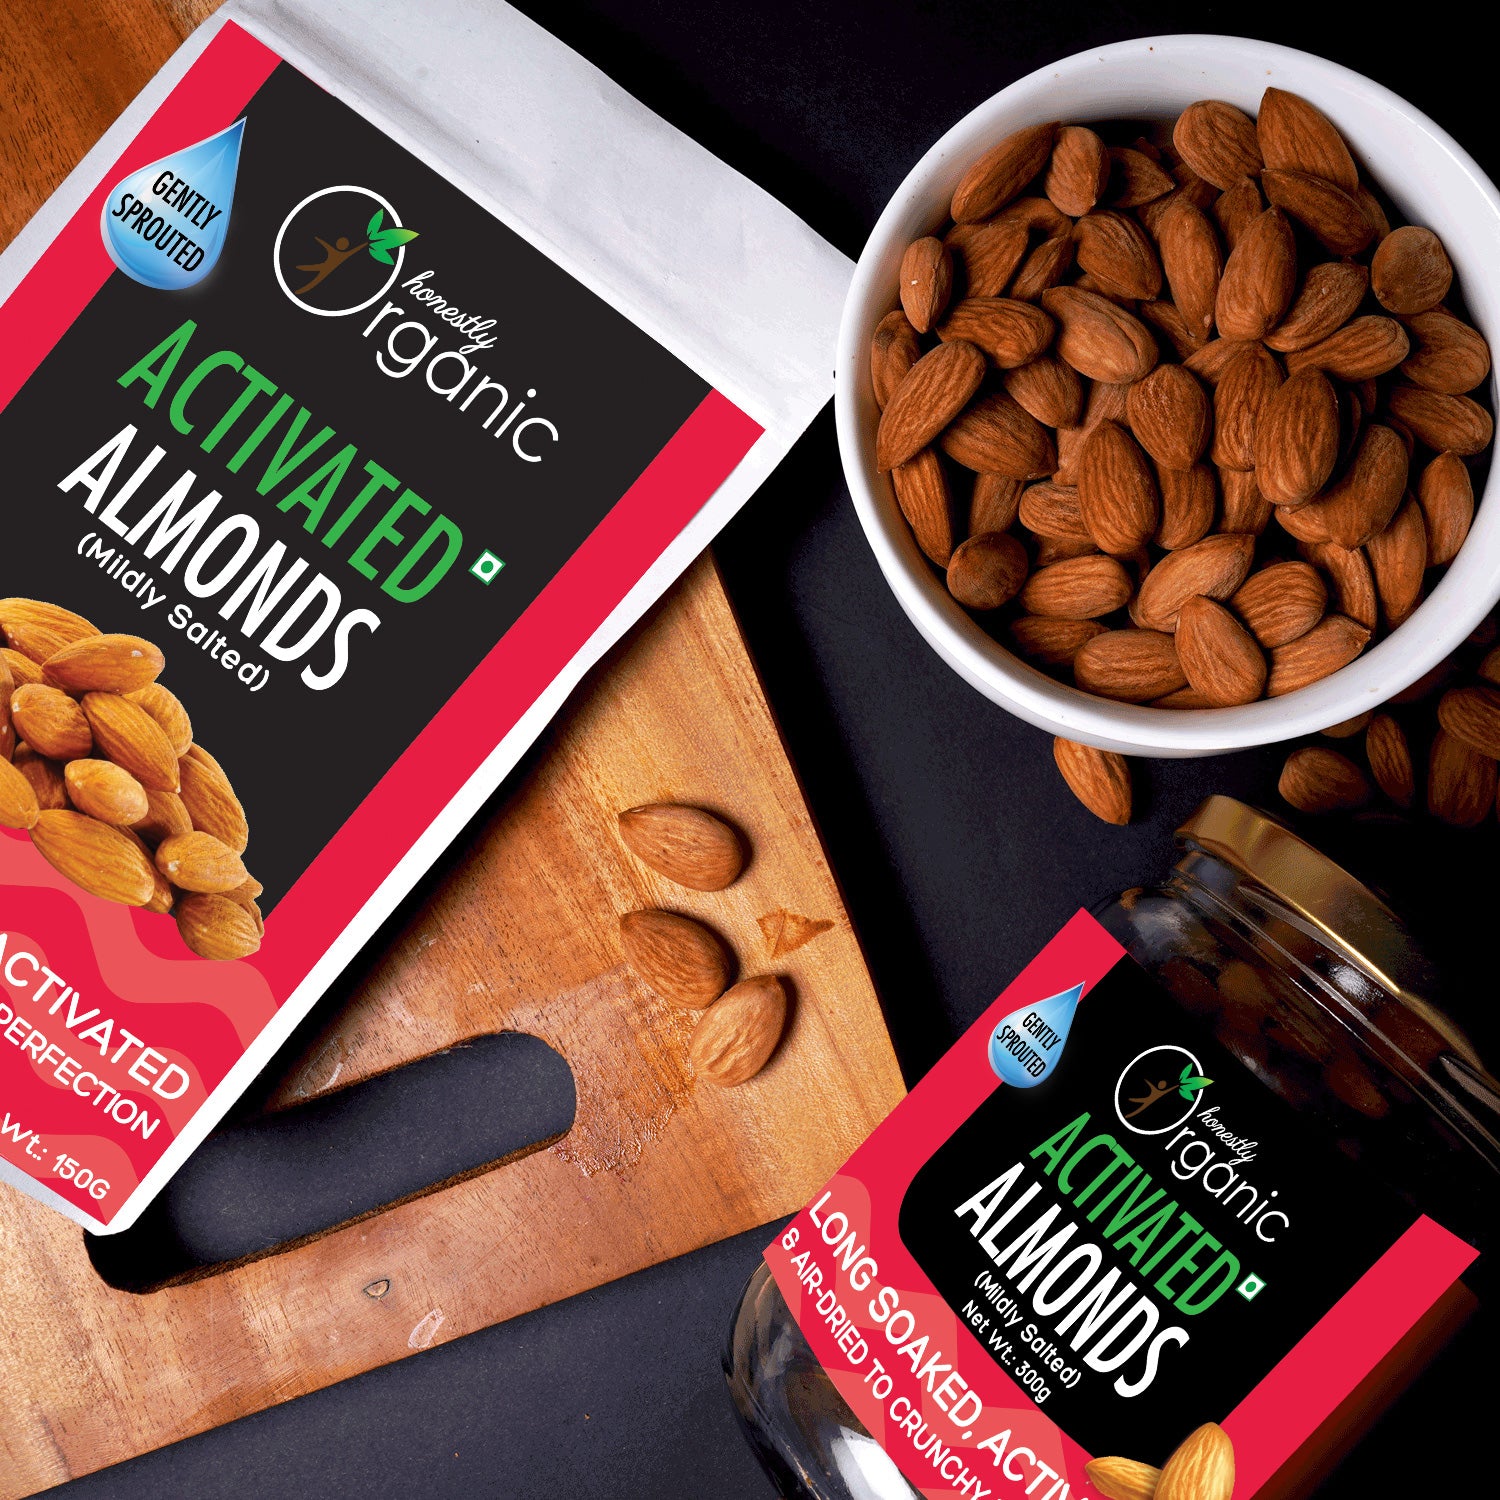 D-Alive Organic Almonds | Activated/Sprouted | Mildly Salted (Long Soaked & Air Dried)